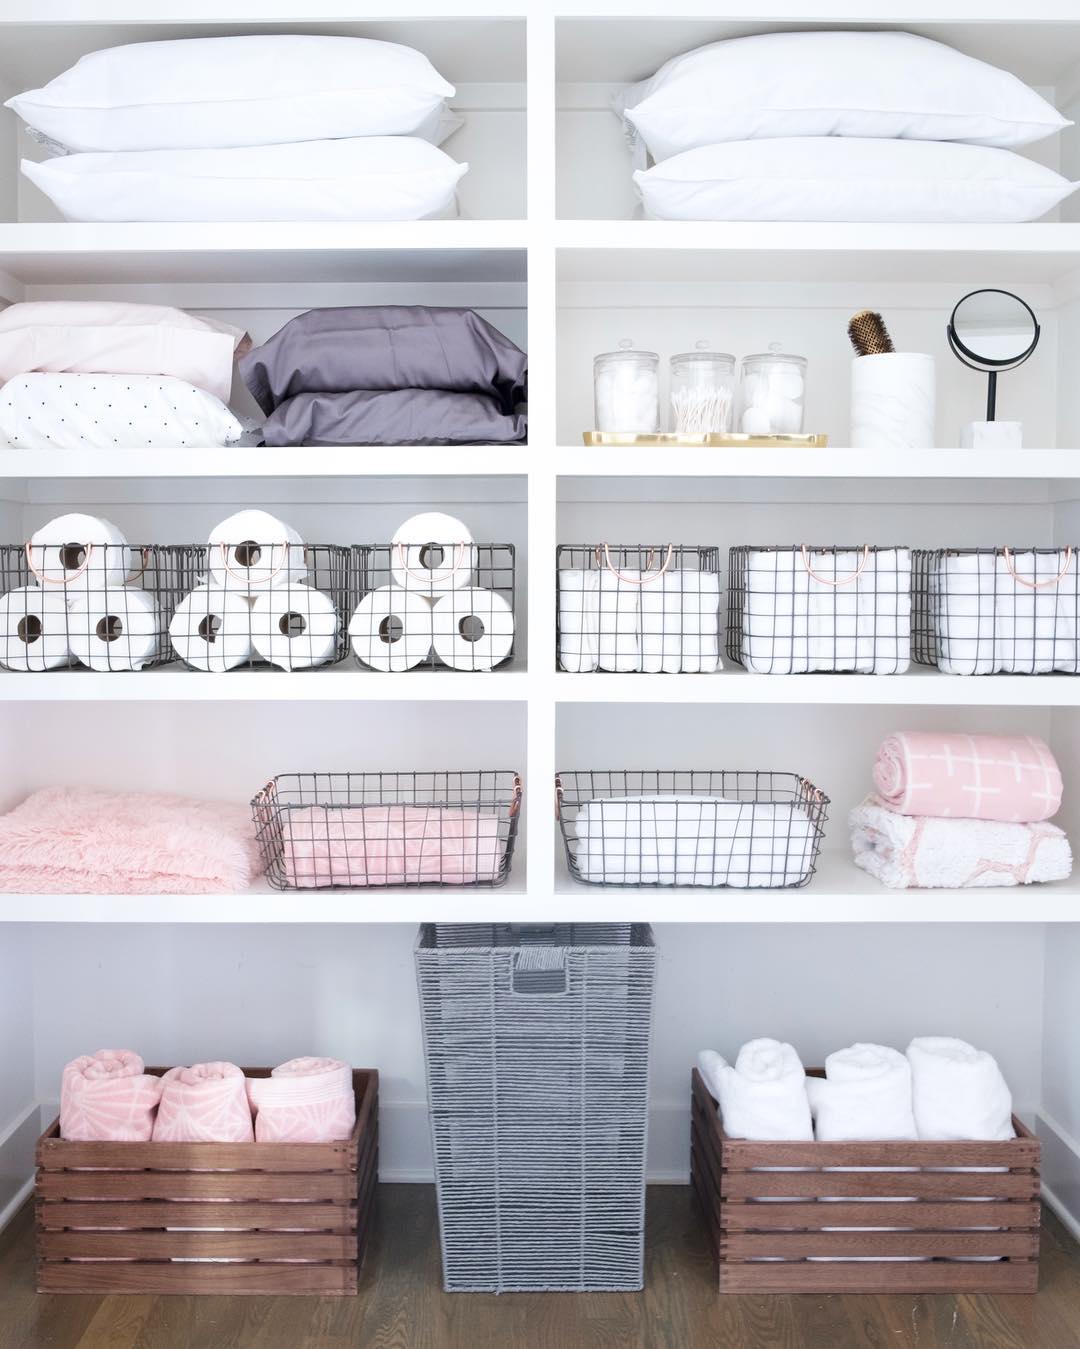 Towels and Laundry Bin Stored on Floor of Linen Closet. Photo by Instagram user @thehomeedit